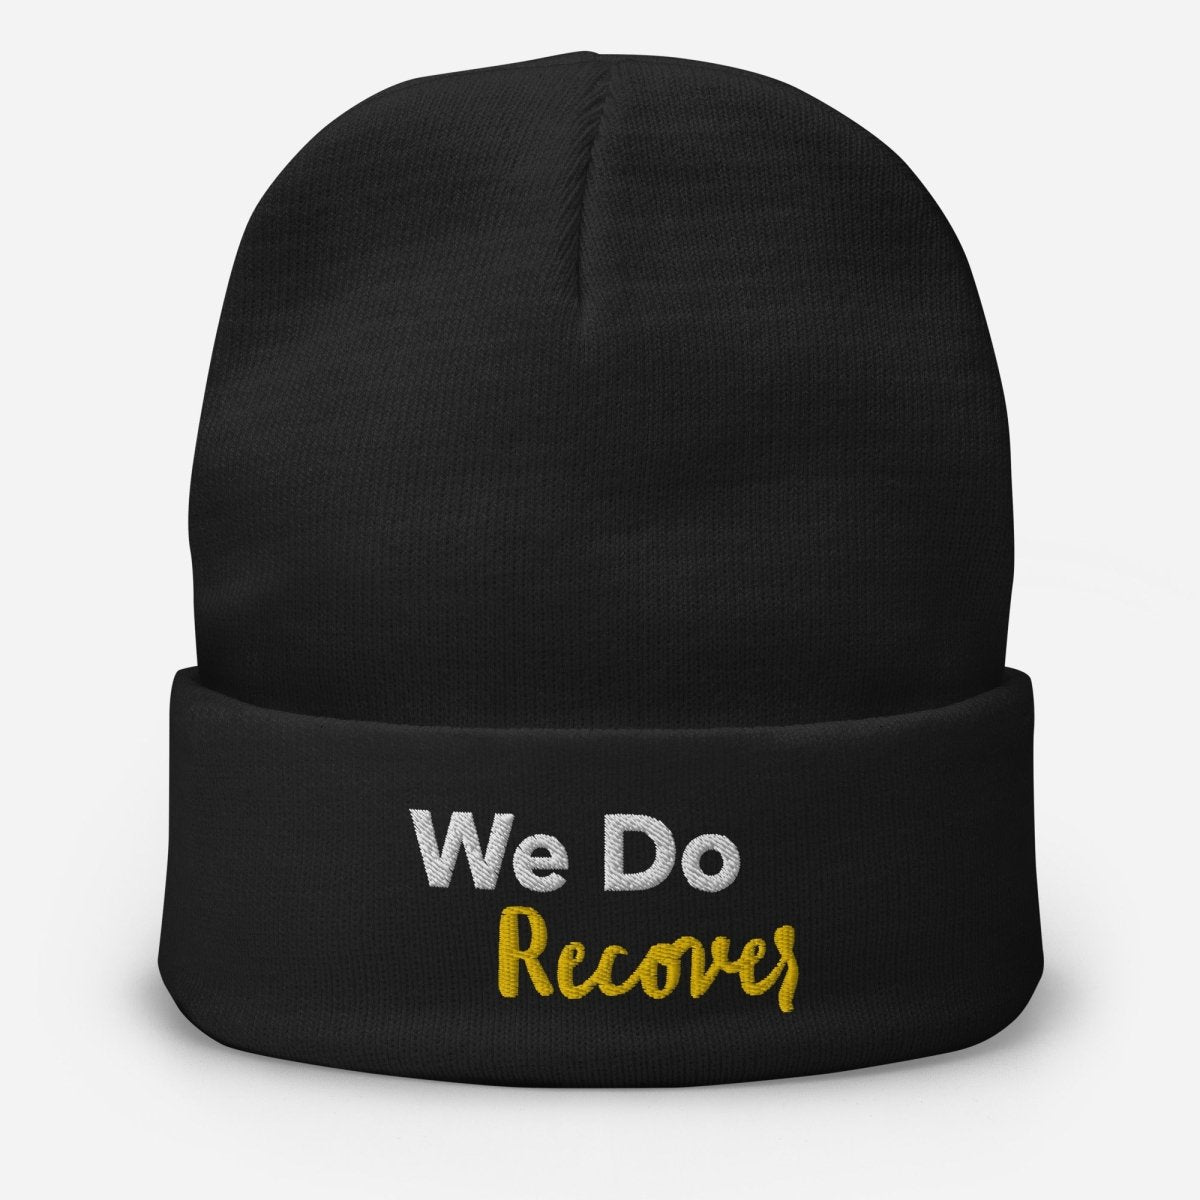 "We Do Recover" Embroidered Beanie - Cozy, Inspiring, Unisex - Black | Sobervation